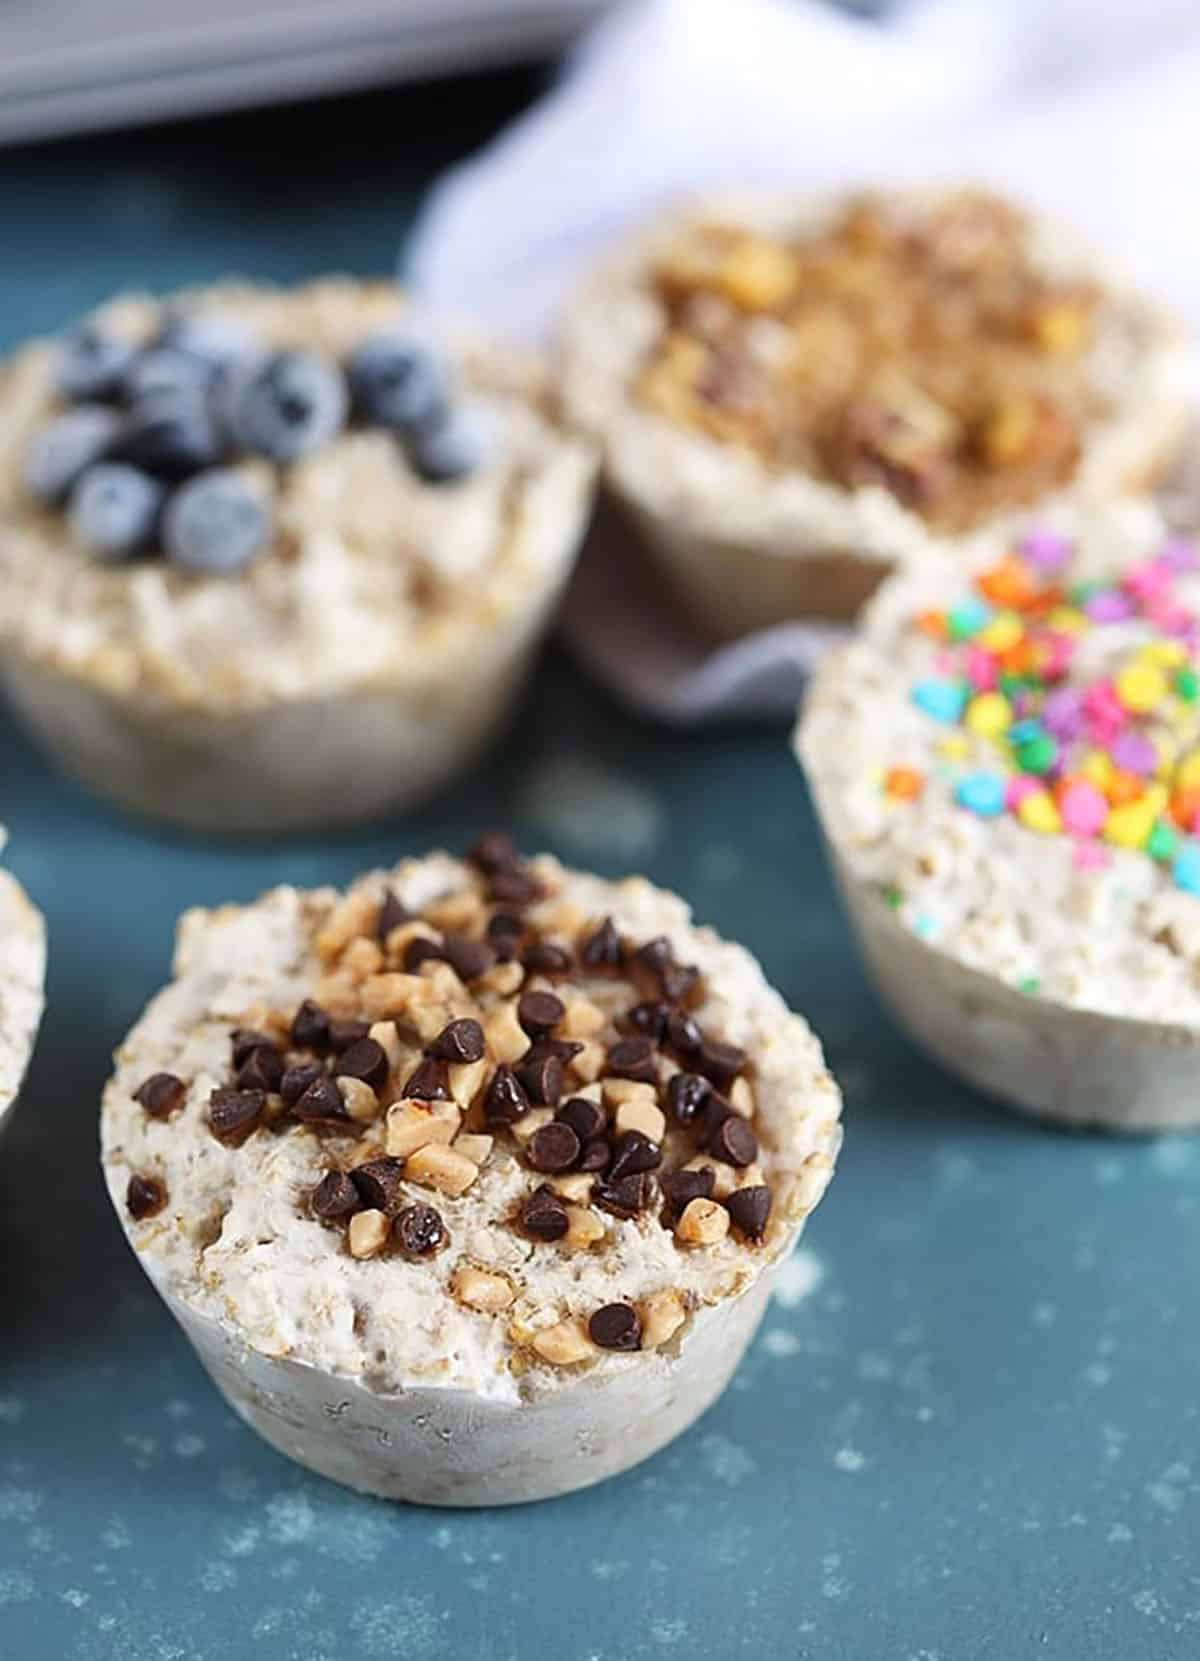 Freezer Steel Cut Oatmeal in muffin cups with toppings like blueberries, sprinkles and chocolate